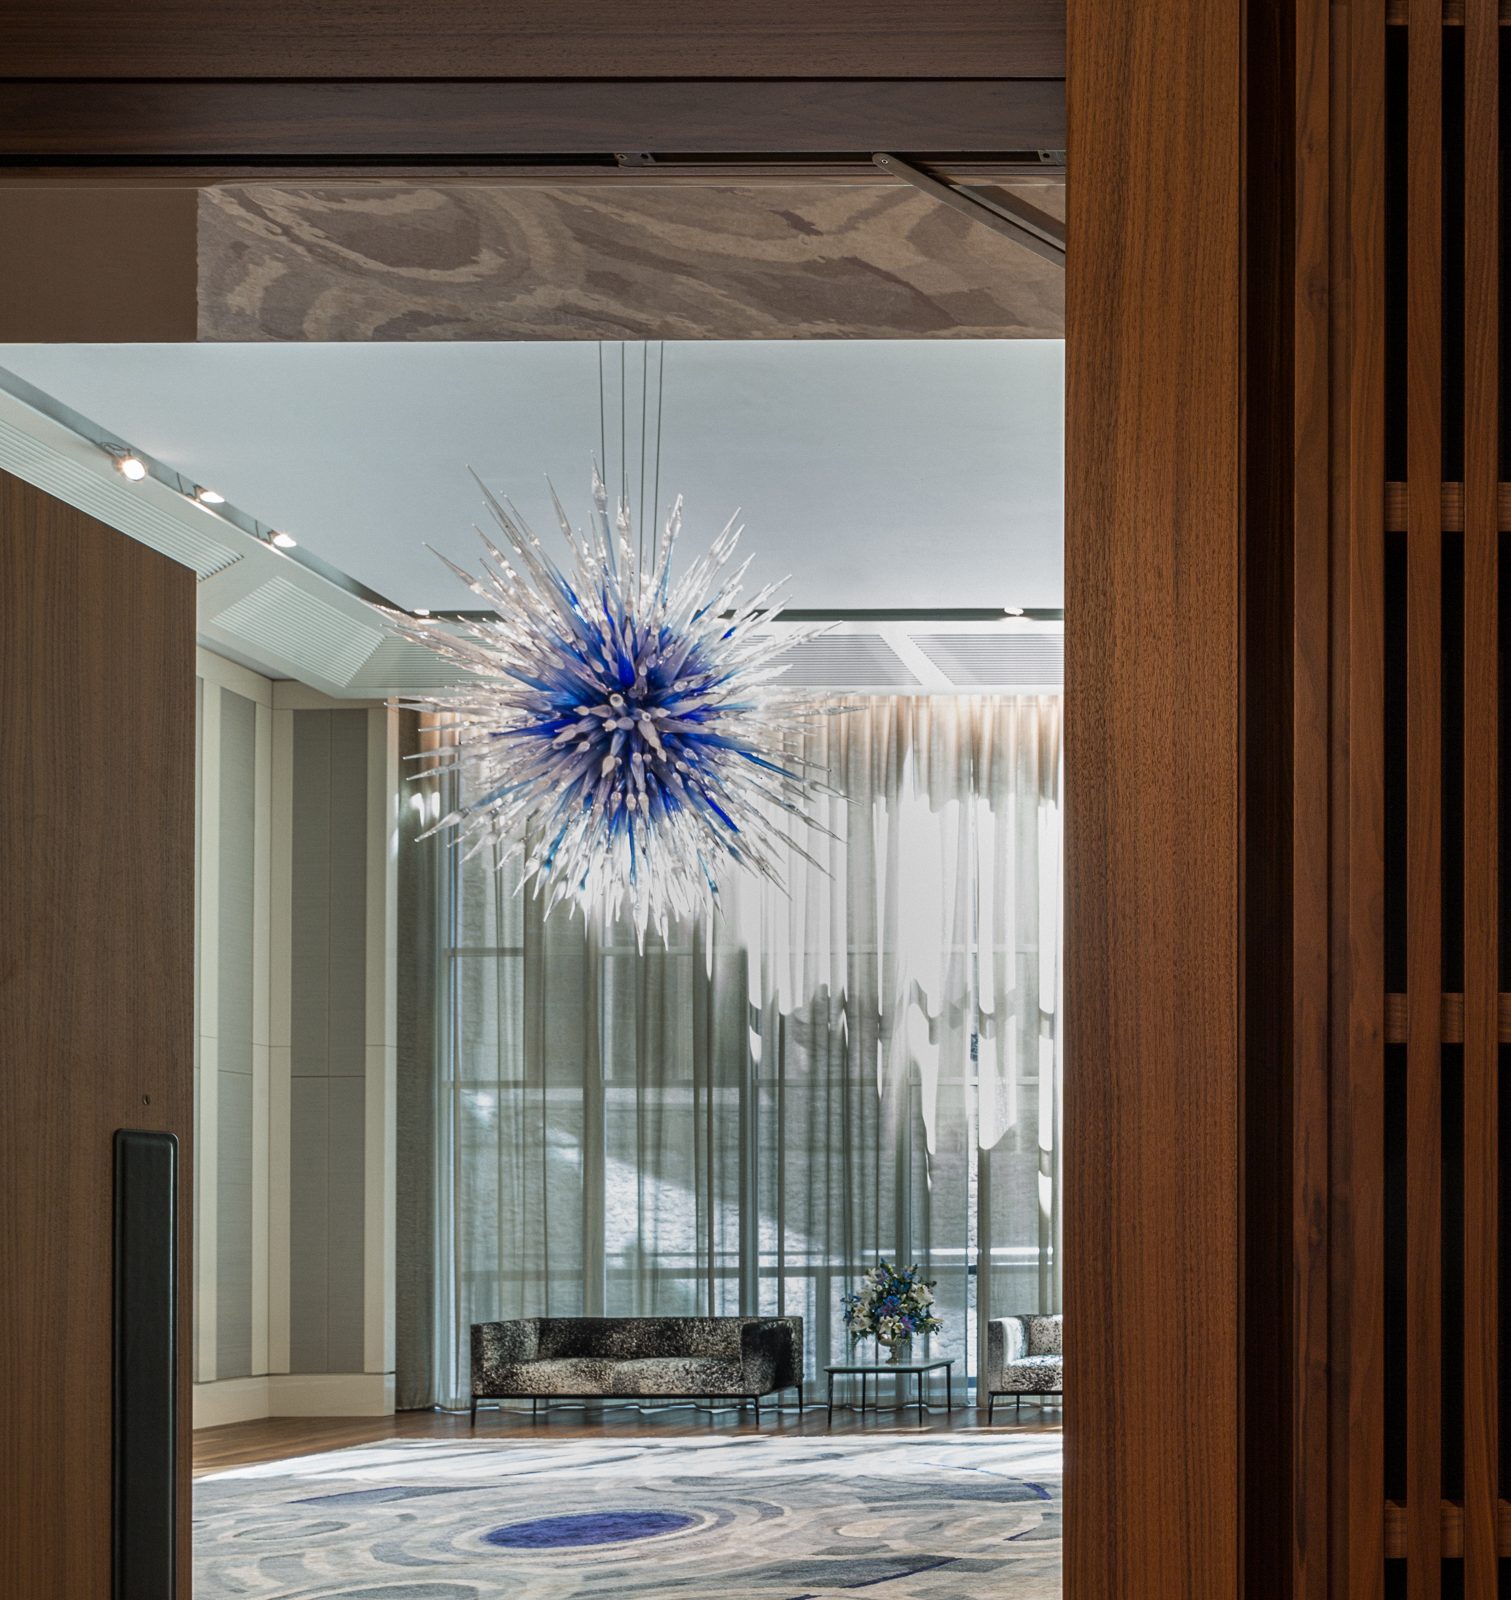 reception room with a large spiked blue glass sculpture